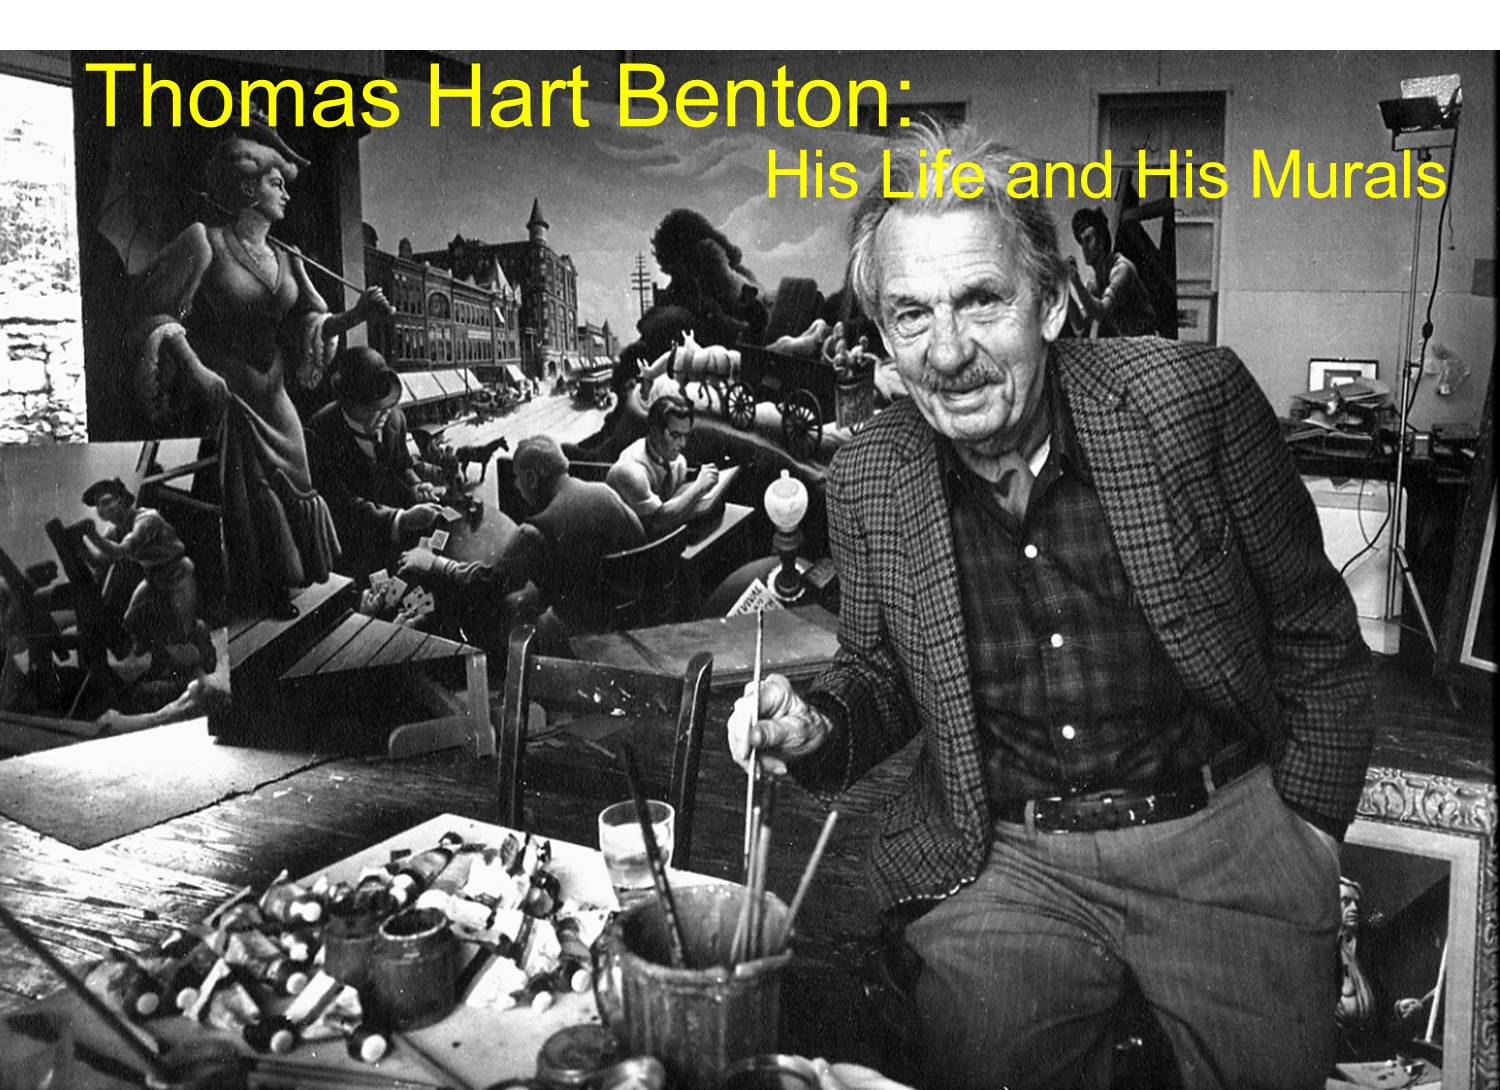 Benton with some of his art